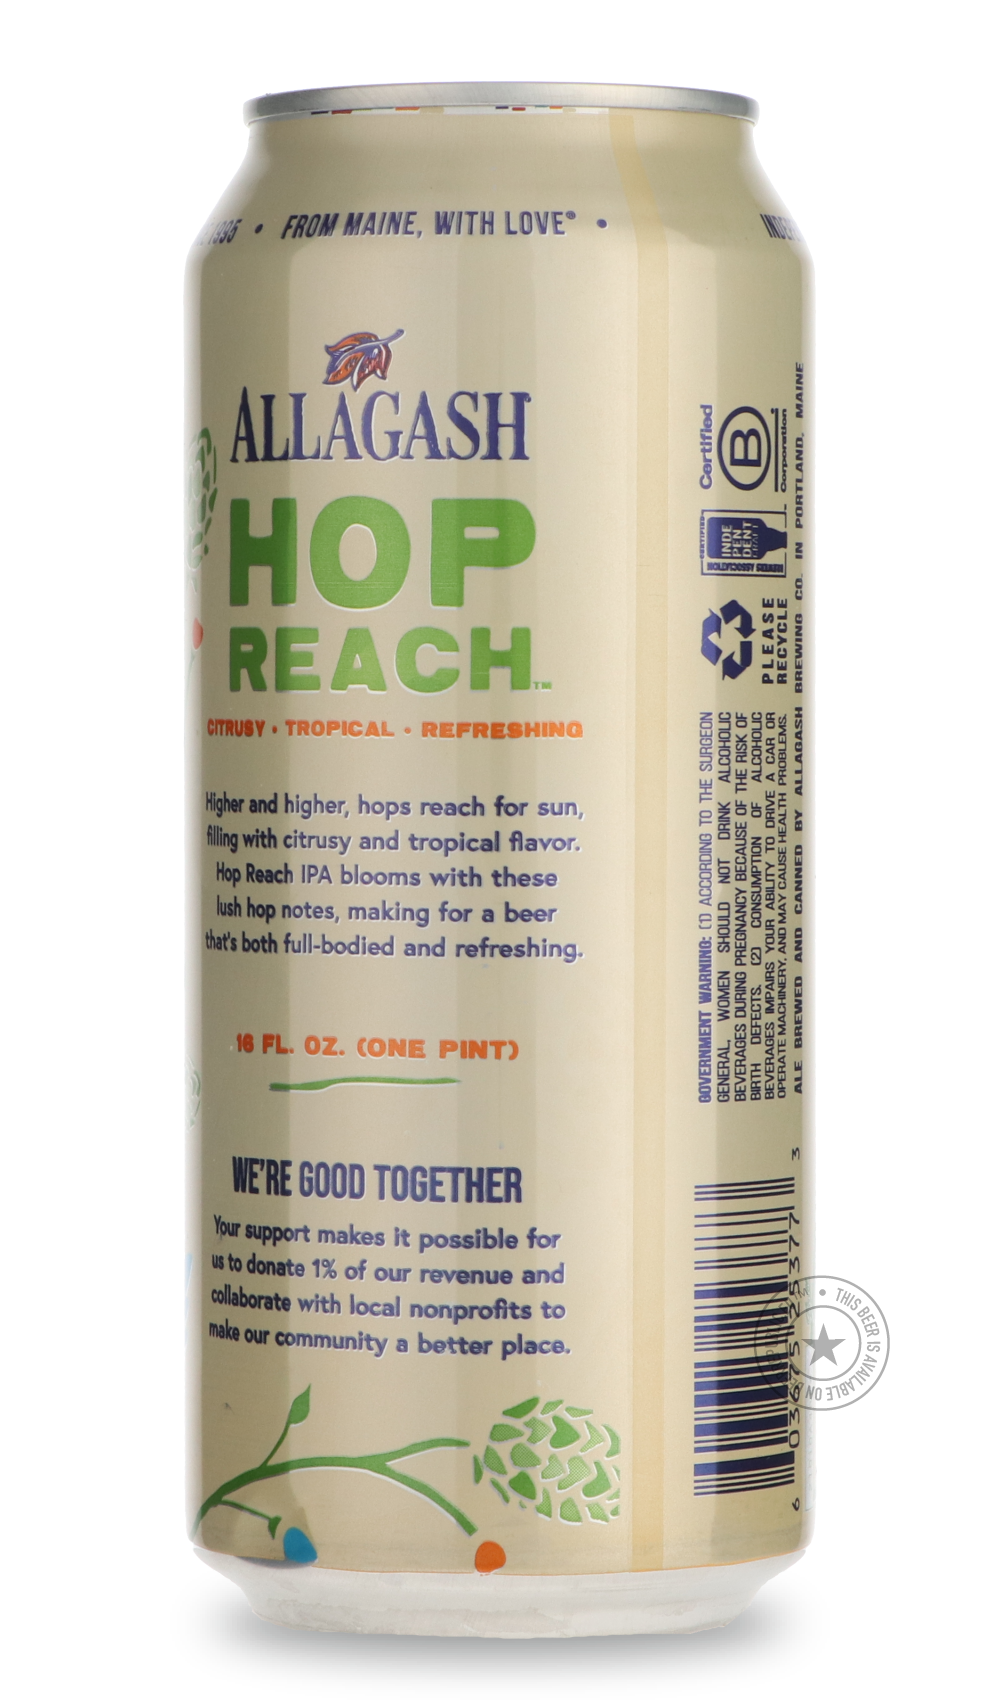 -Allagash- Hop Reach-IPA- Only @ Beer Republic - The best online beer store for American & Canadian craft beer - Buy beer online from the USA and Canada - Bier online kopen - Amerikaans bier kopen - Craft beer store - Craft beer kopen - Amerikanisch bier kaufen - Bier online kaufen - Acheter biere online - IPA - Stout - Porter - New England IPA - Hazy IPA - Imperial Stout - Barrel Aged - Barrel Aged Imperial Stout - Brown - Dark beer - Blond - Blonde - Pilsner - Lager - Wheat - Weizen - Amber - Barley Wine 